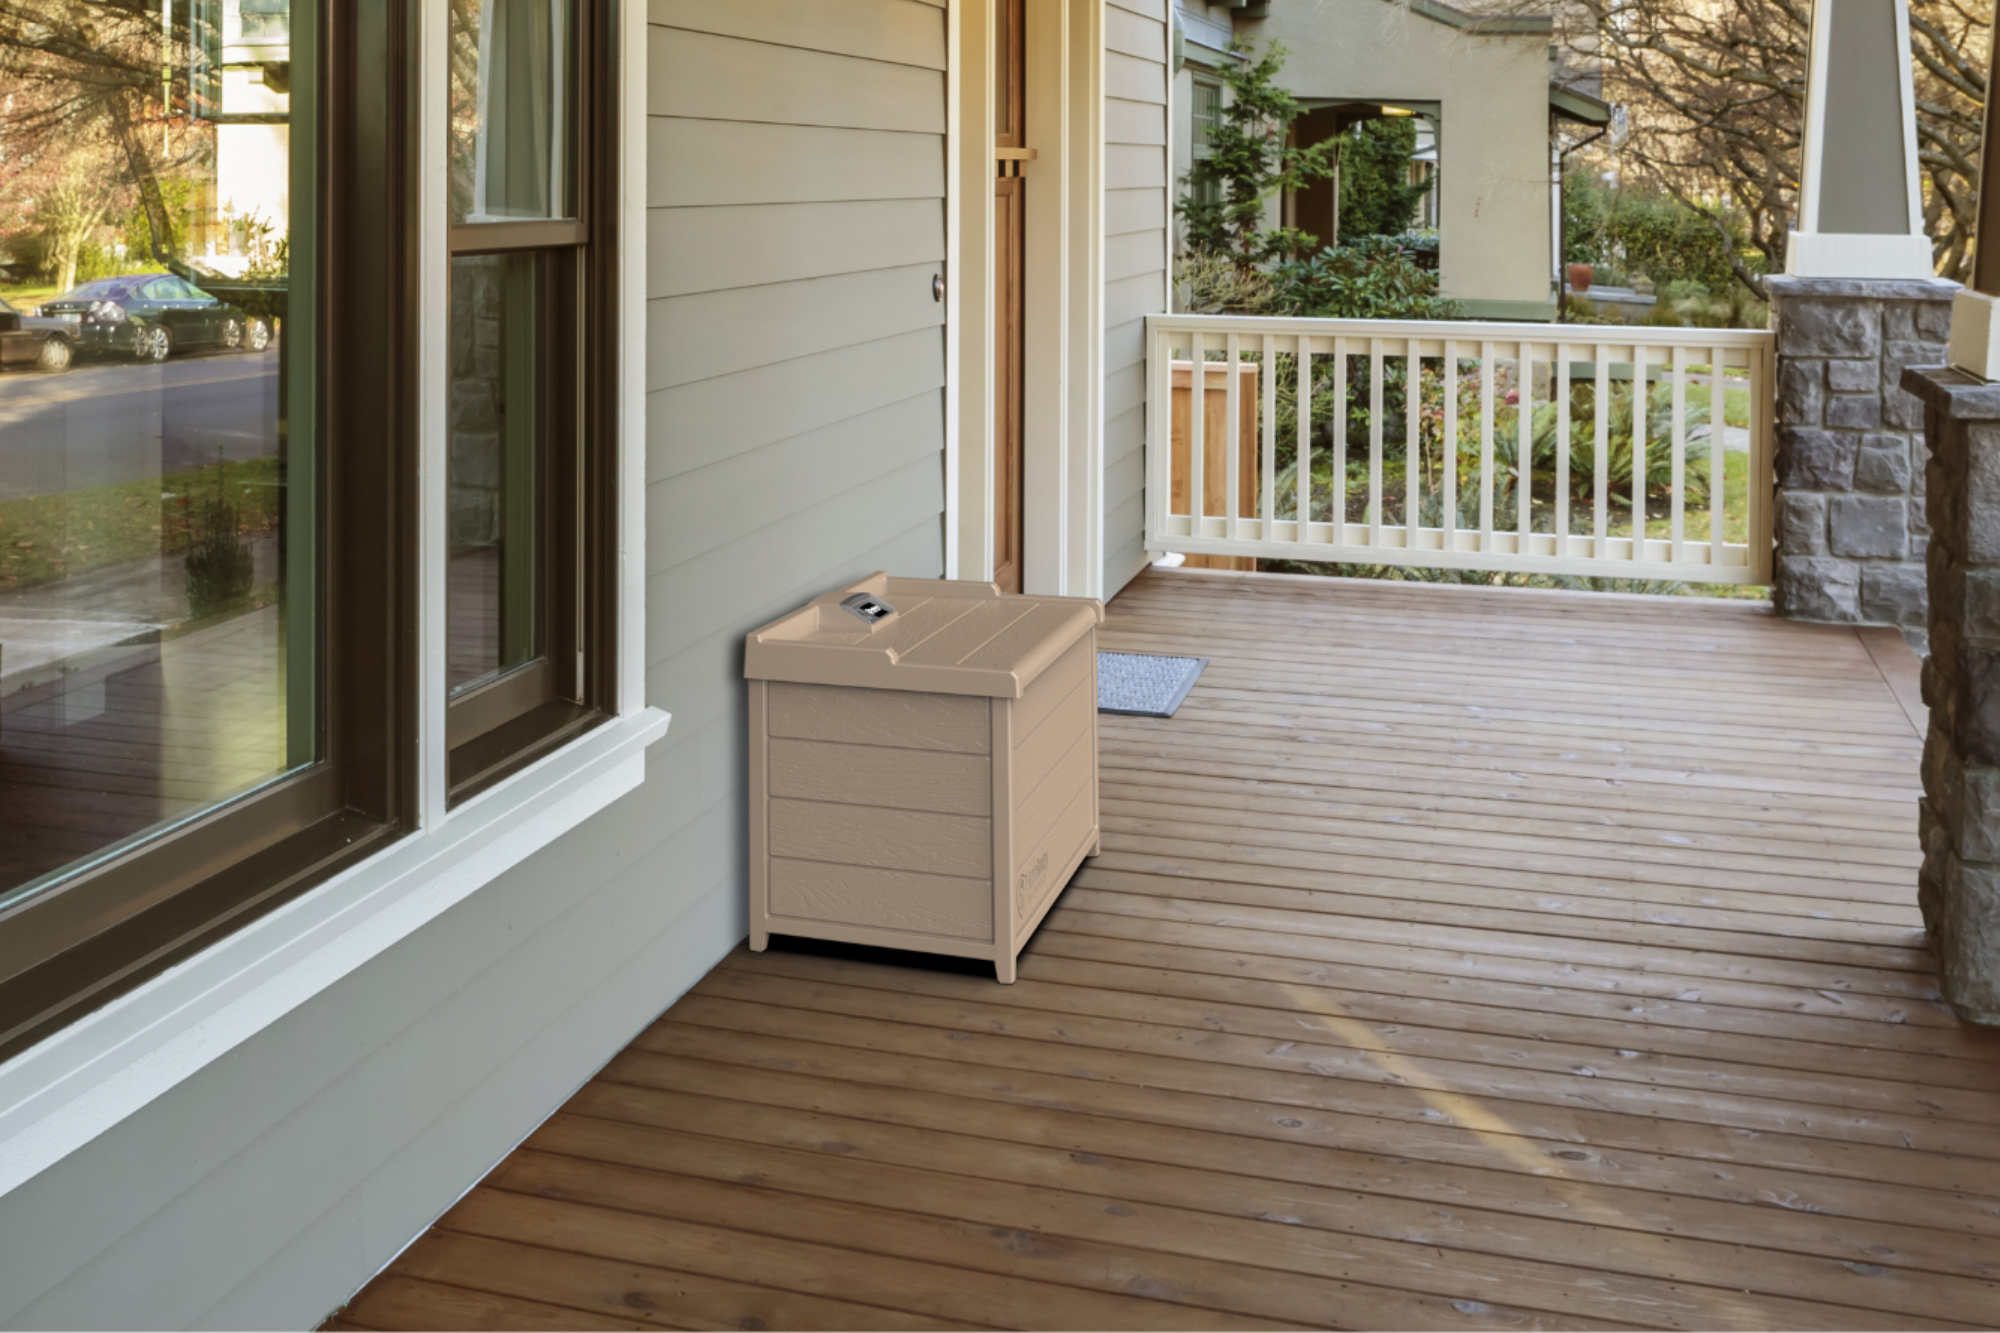 BenchSentry Smart Package Delivery Solution on a porch